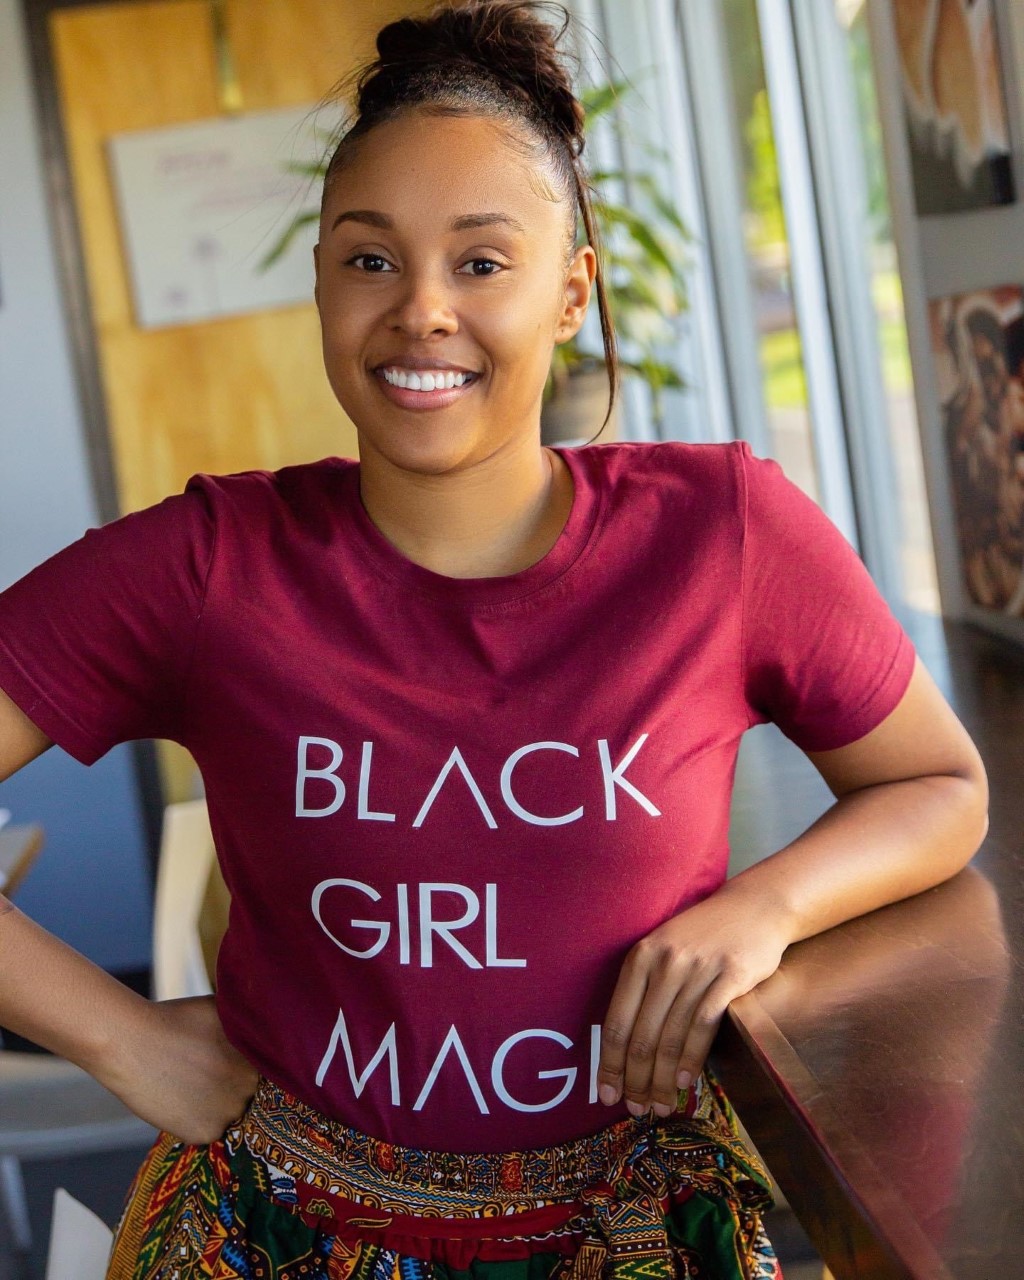 A photo of a woman wearing a t-shirt that says Black Girl Magic